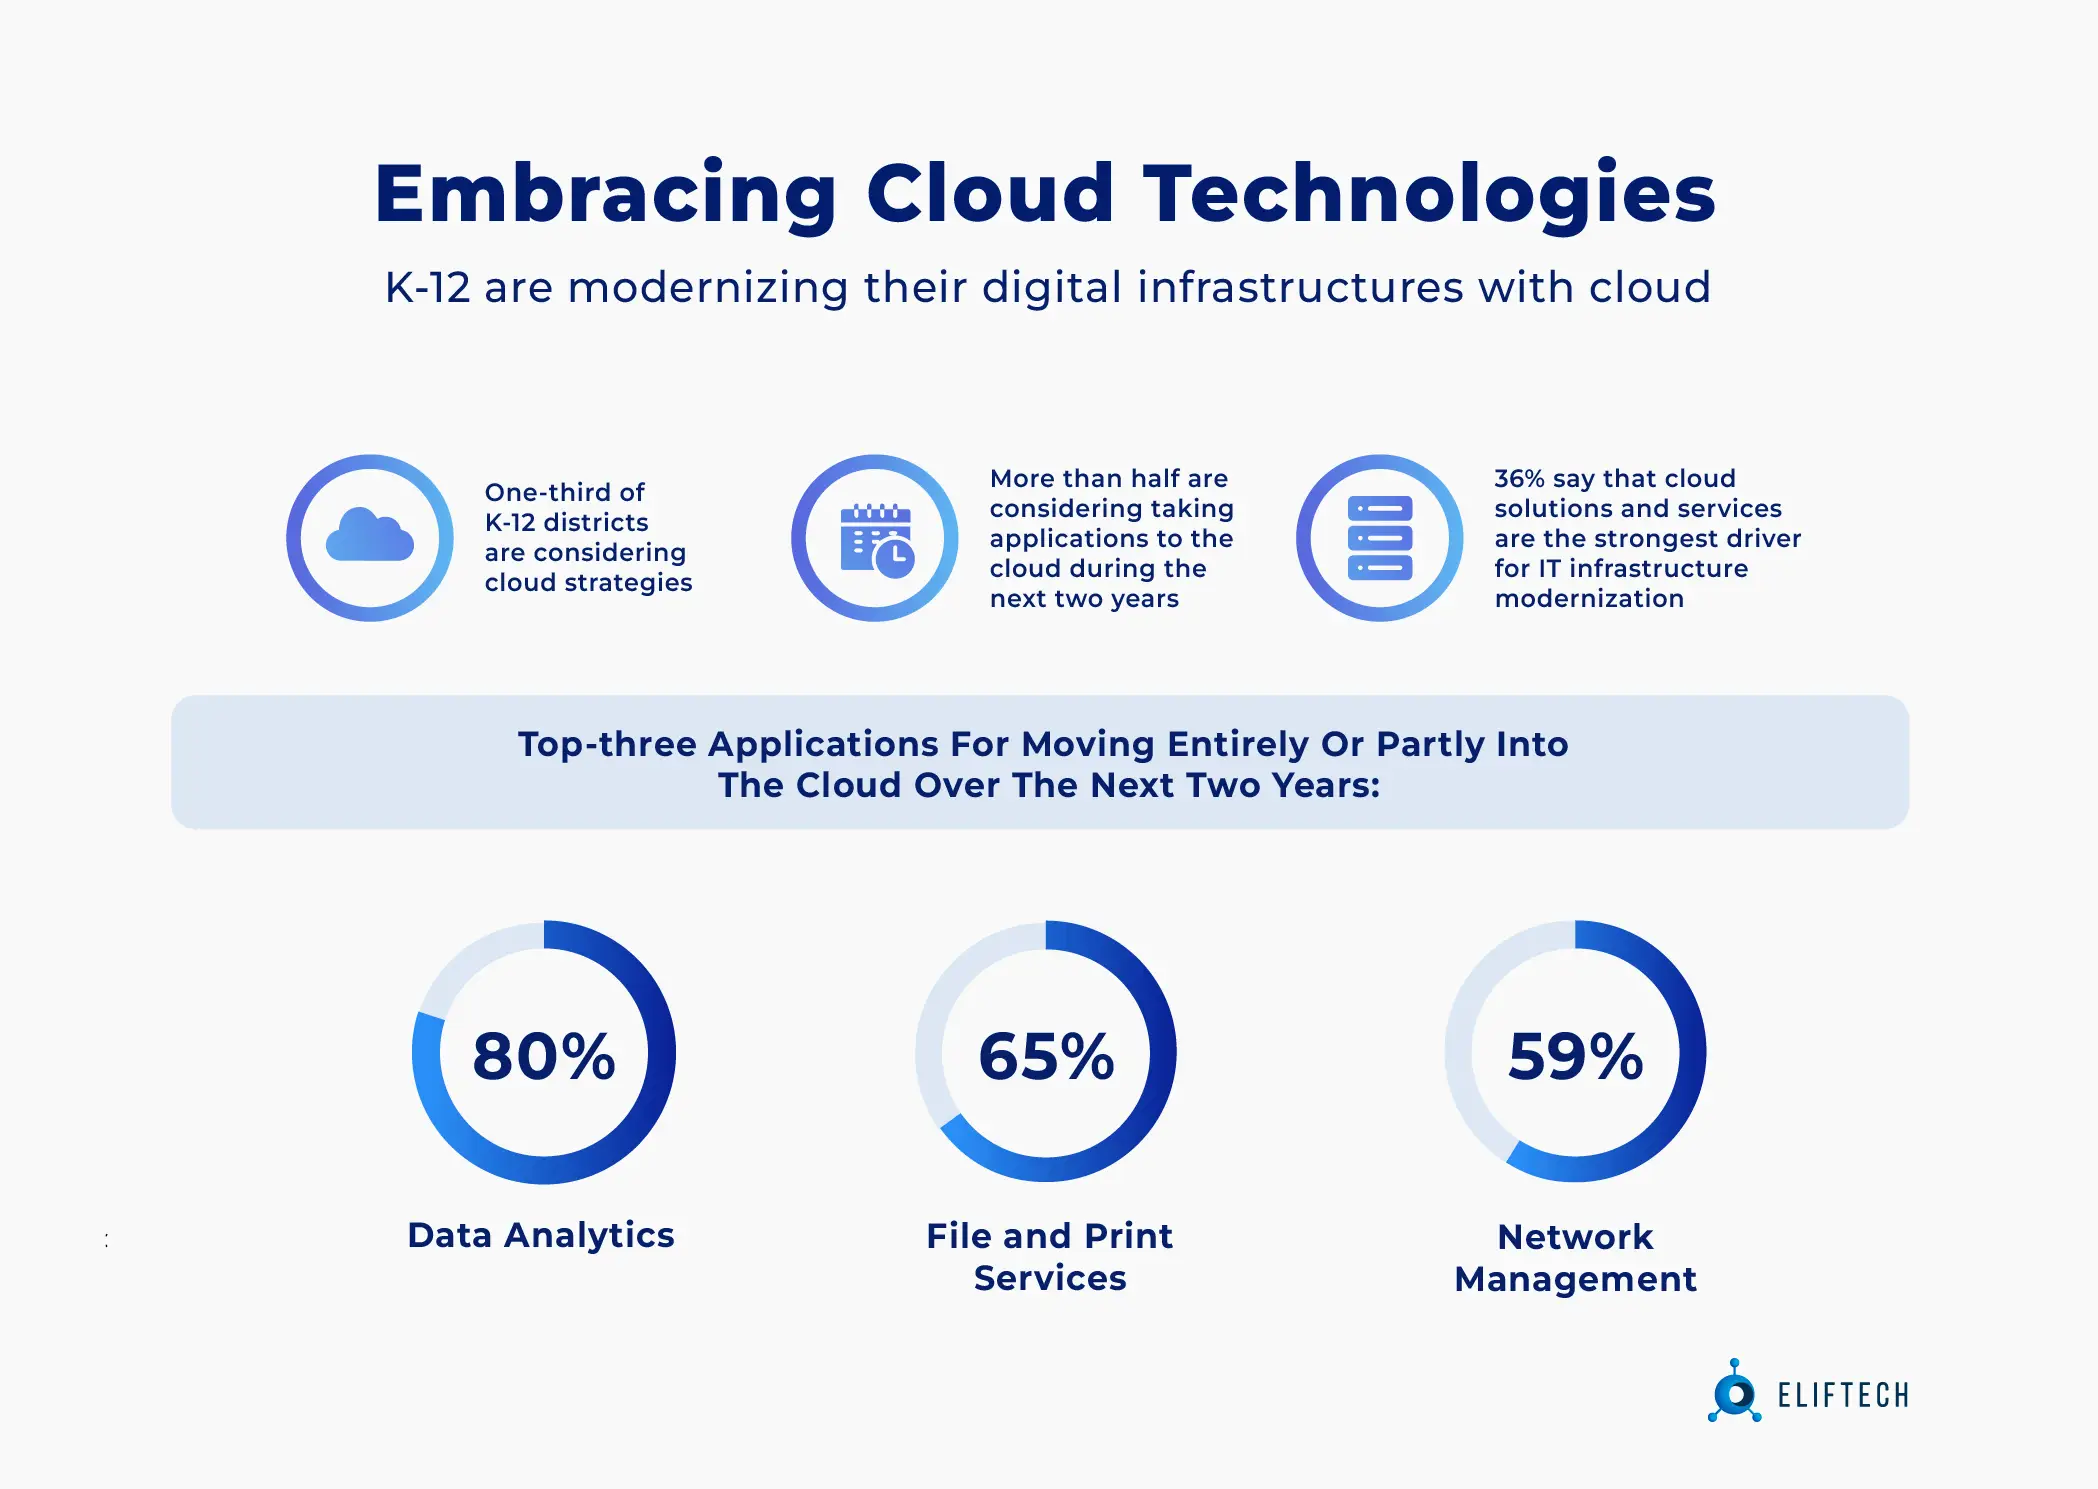 K-12 are modernizing their digital infrastructures with cloud: statistics